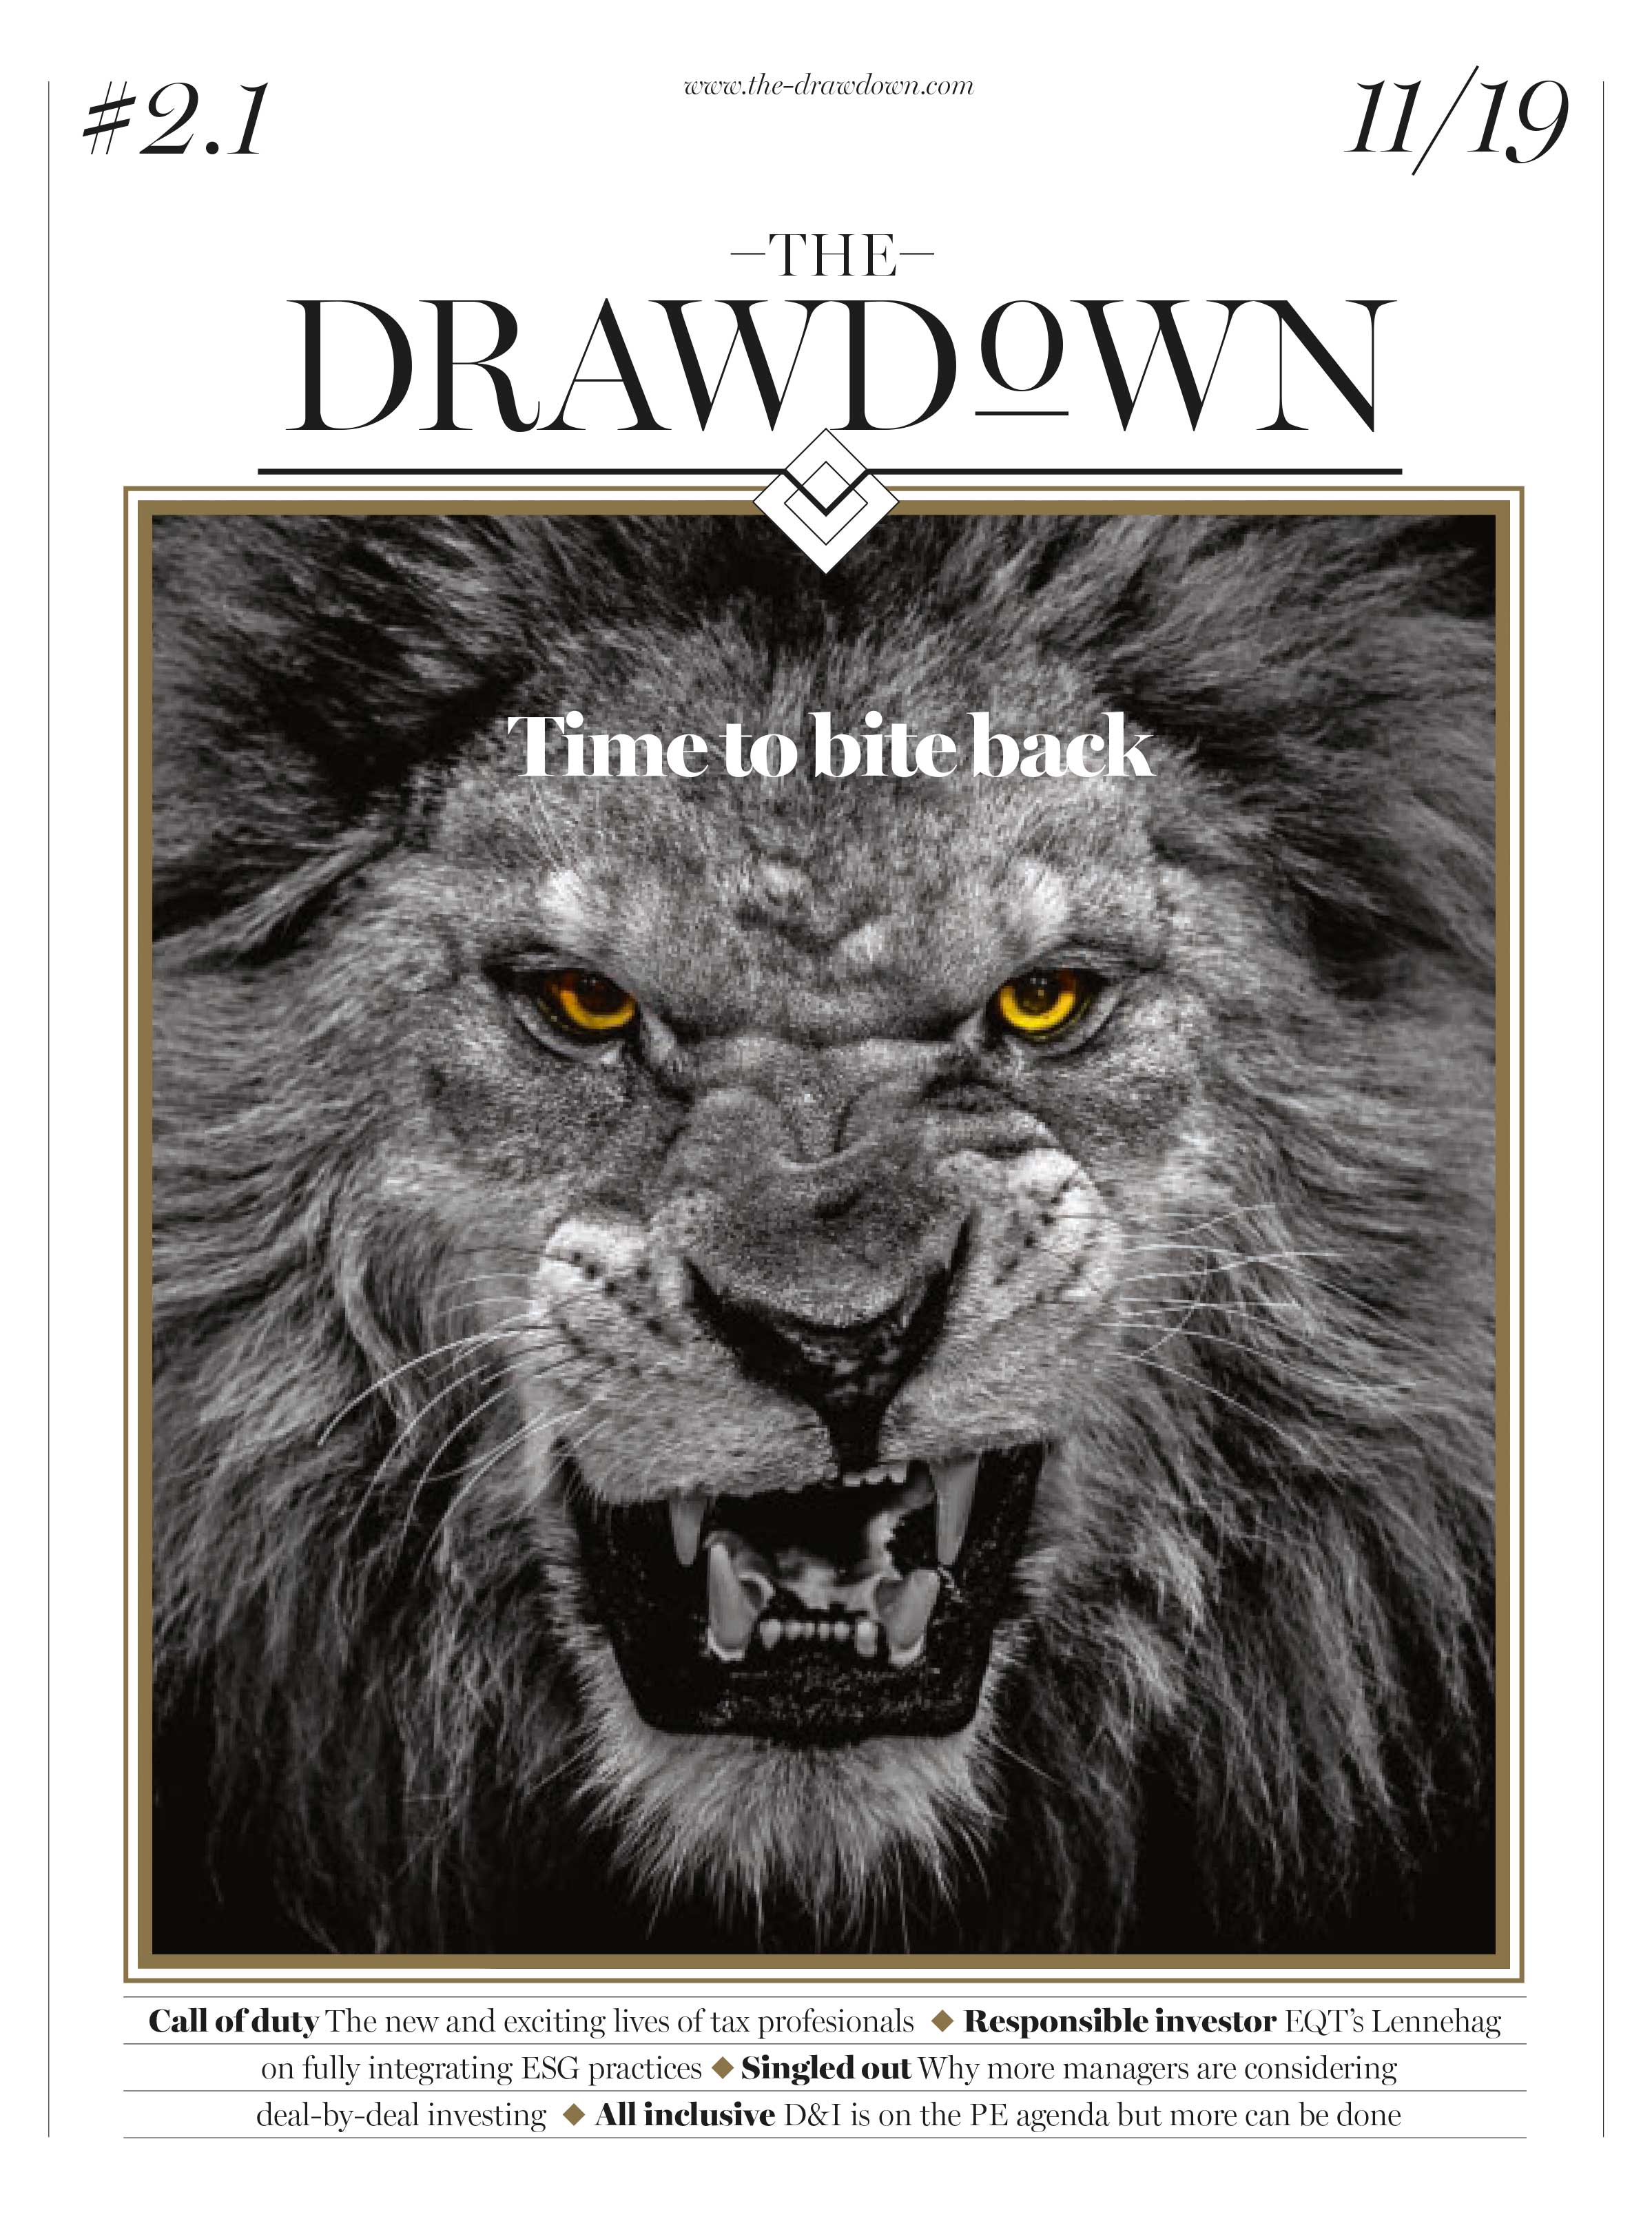 The Drawdown Issue November 2019 Cover